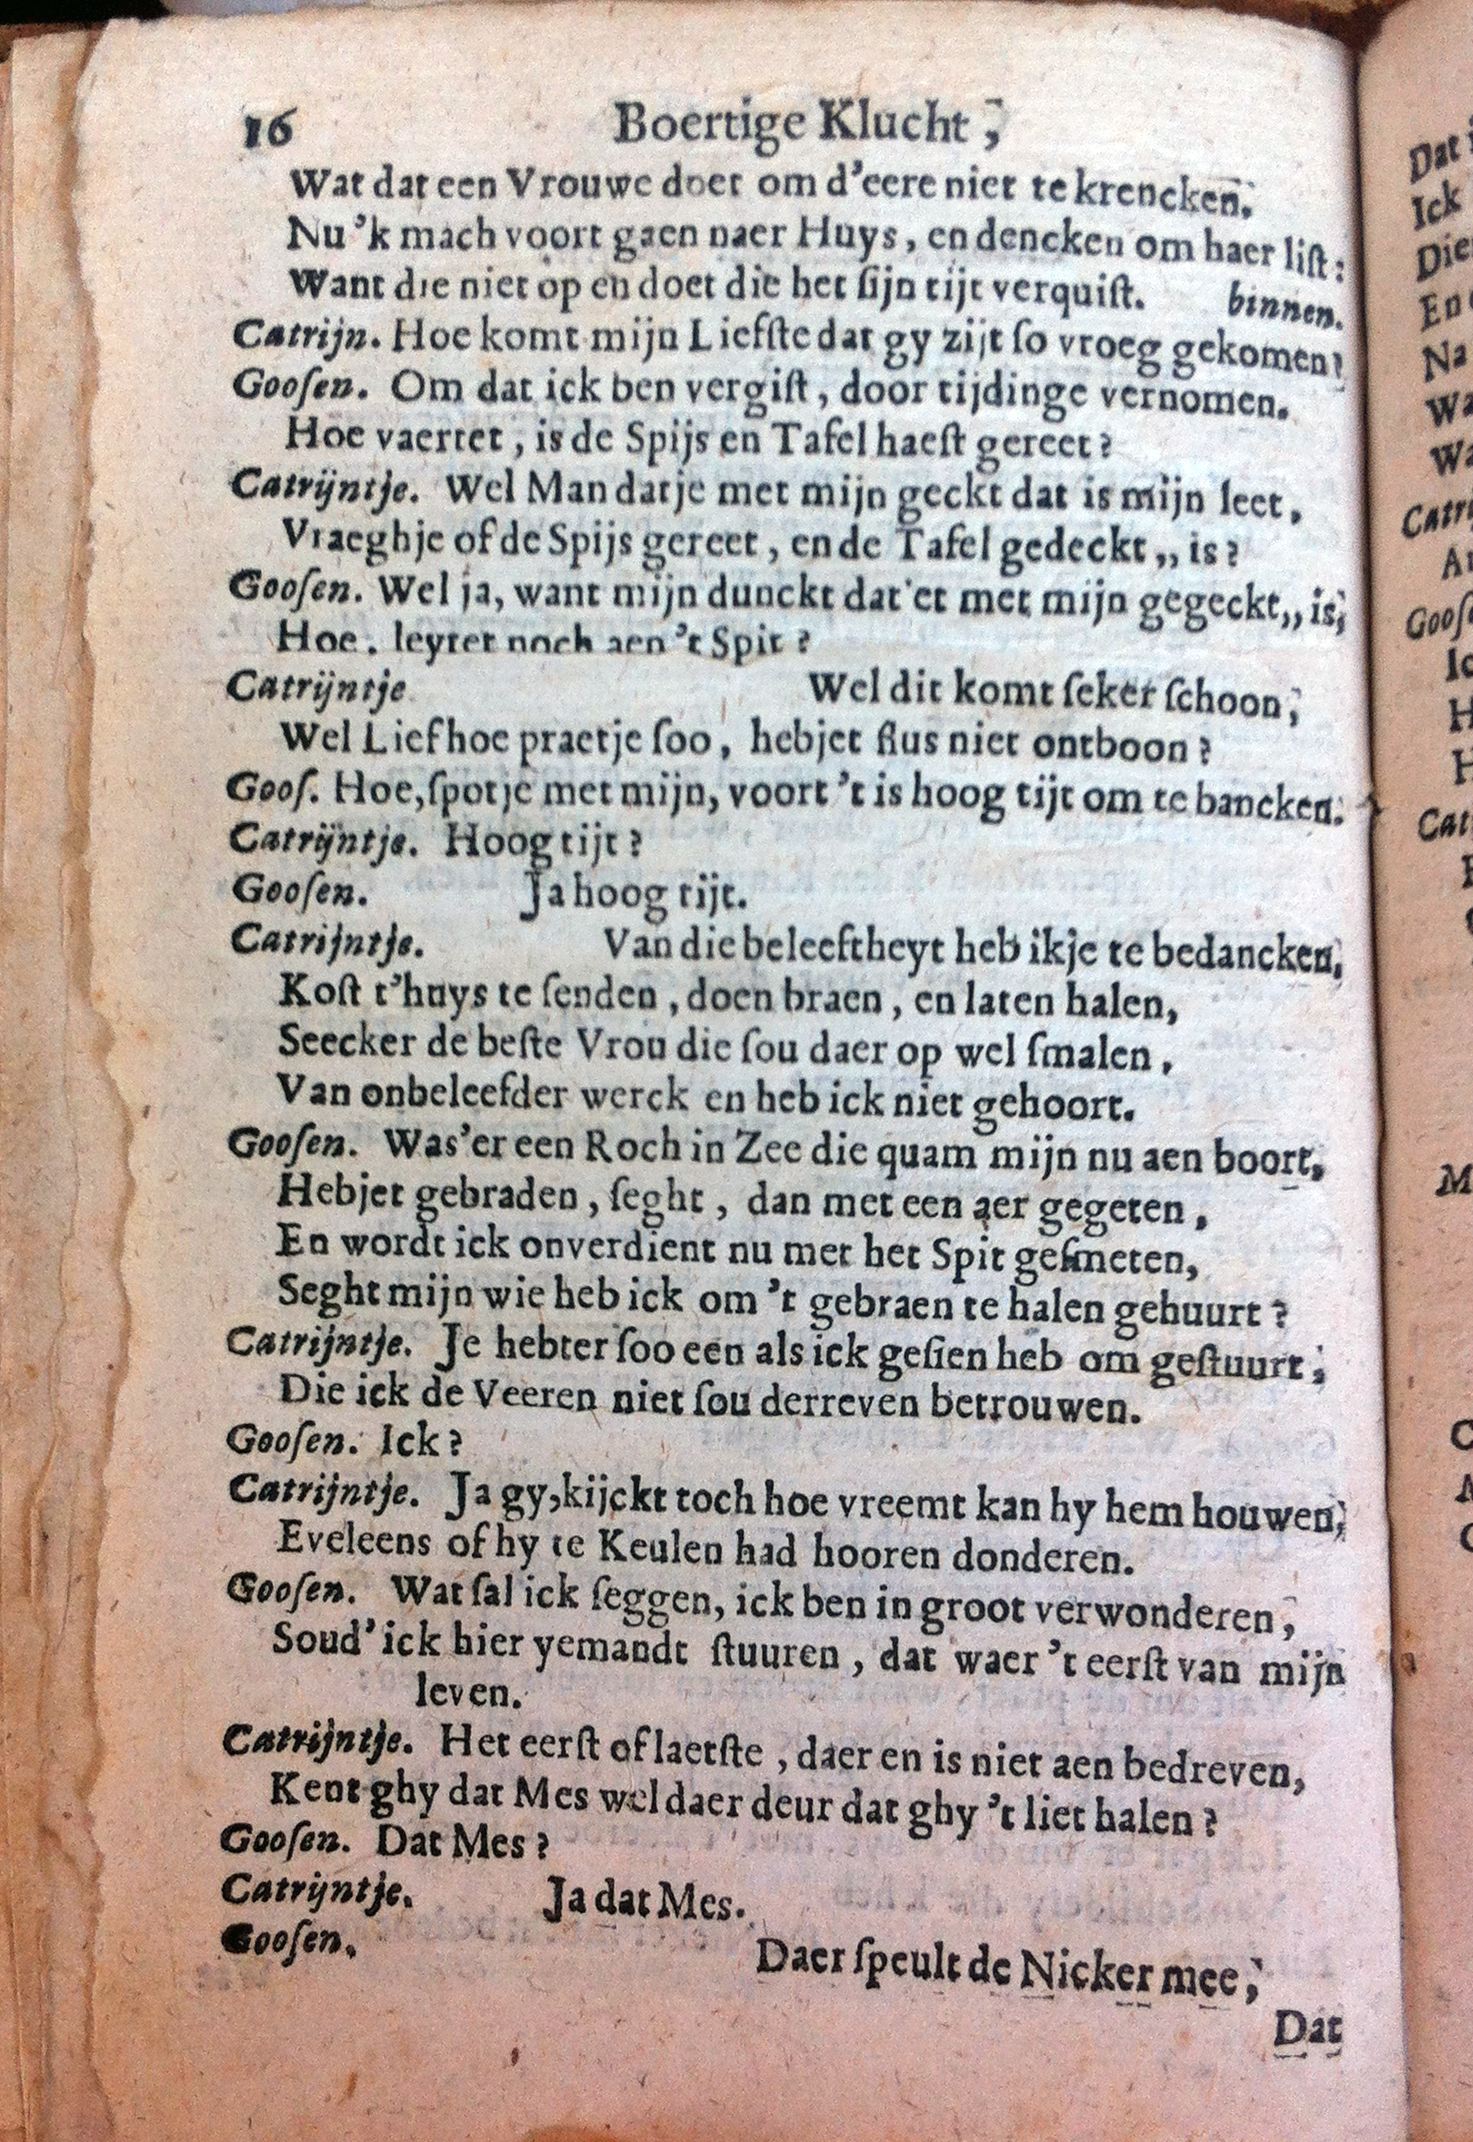 KluchtSaus1679p16